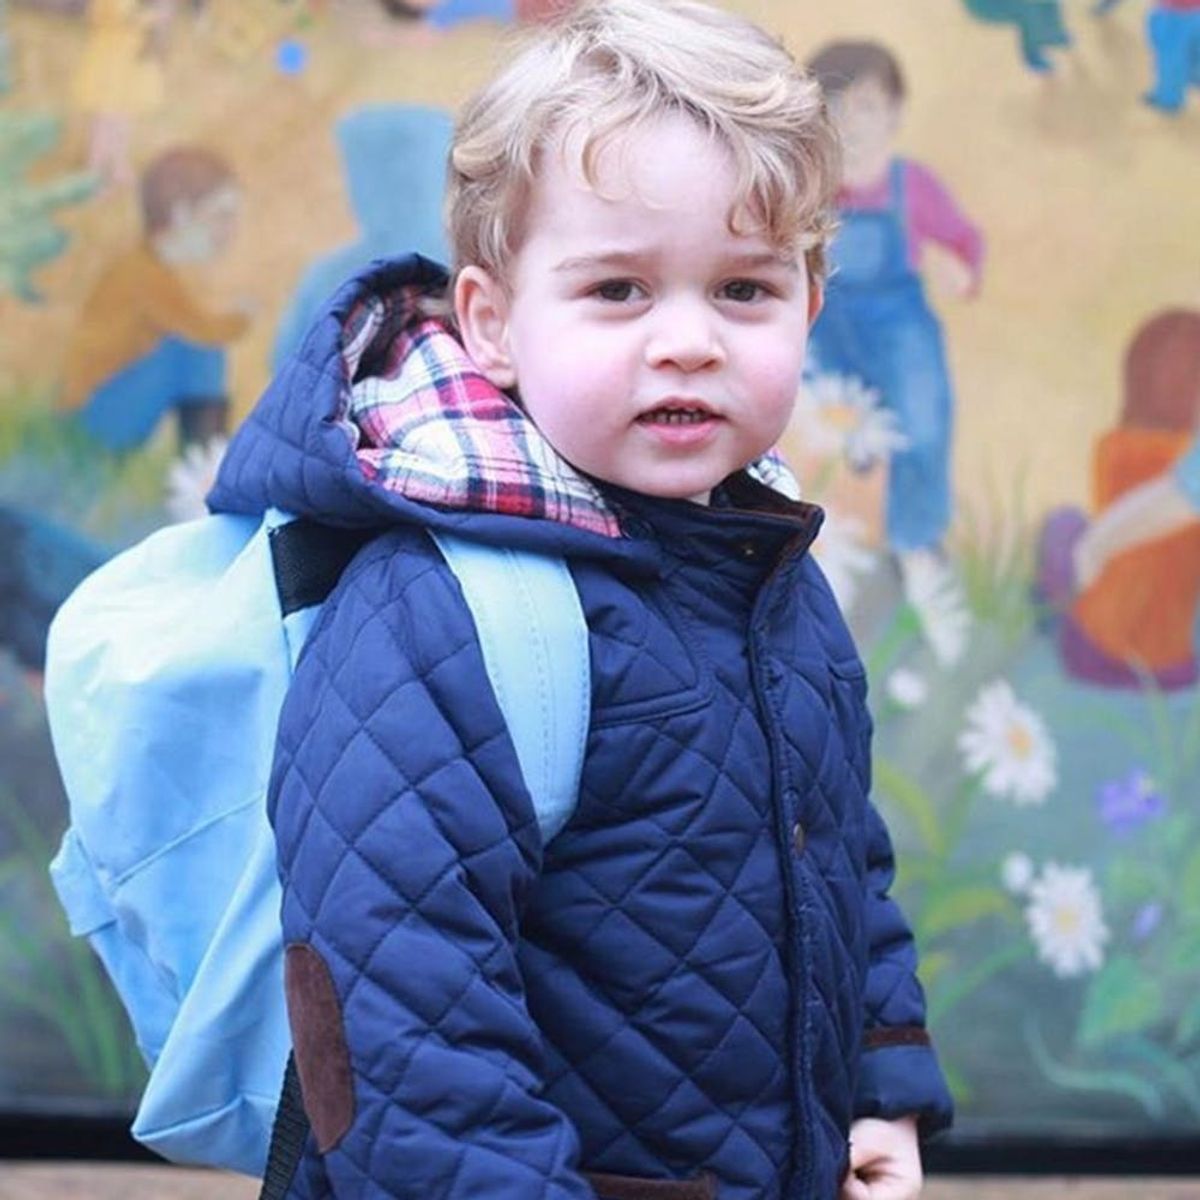 Prince George’s Newest Royal Portrait Is 100% Adorable